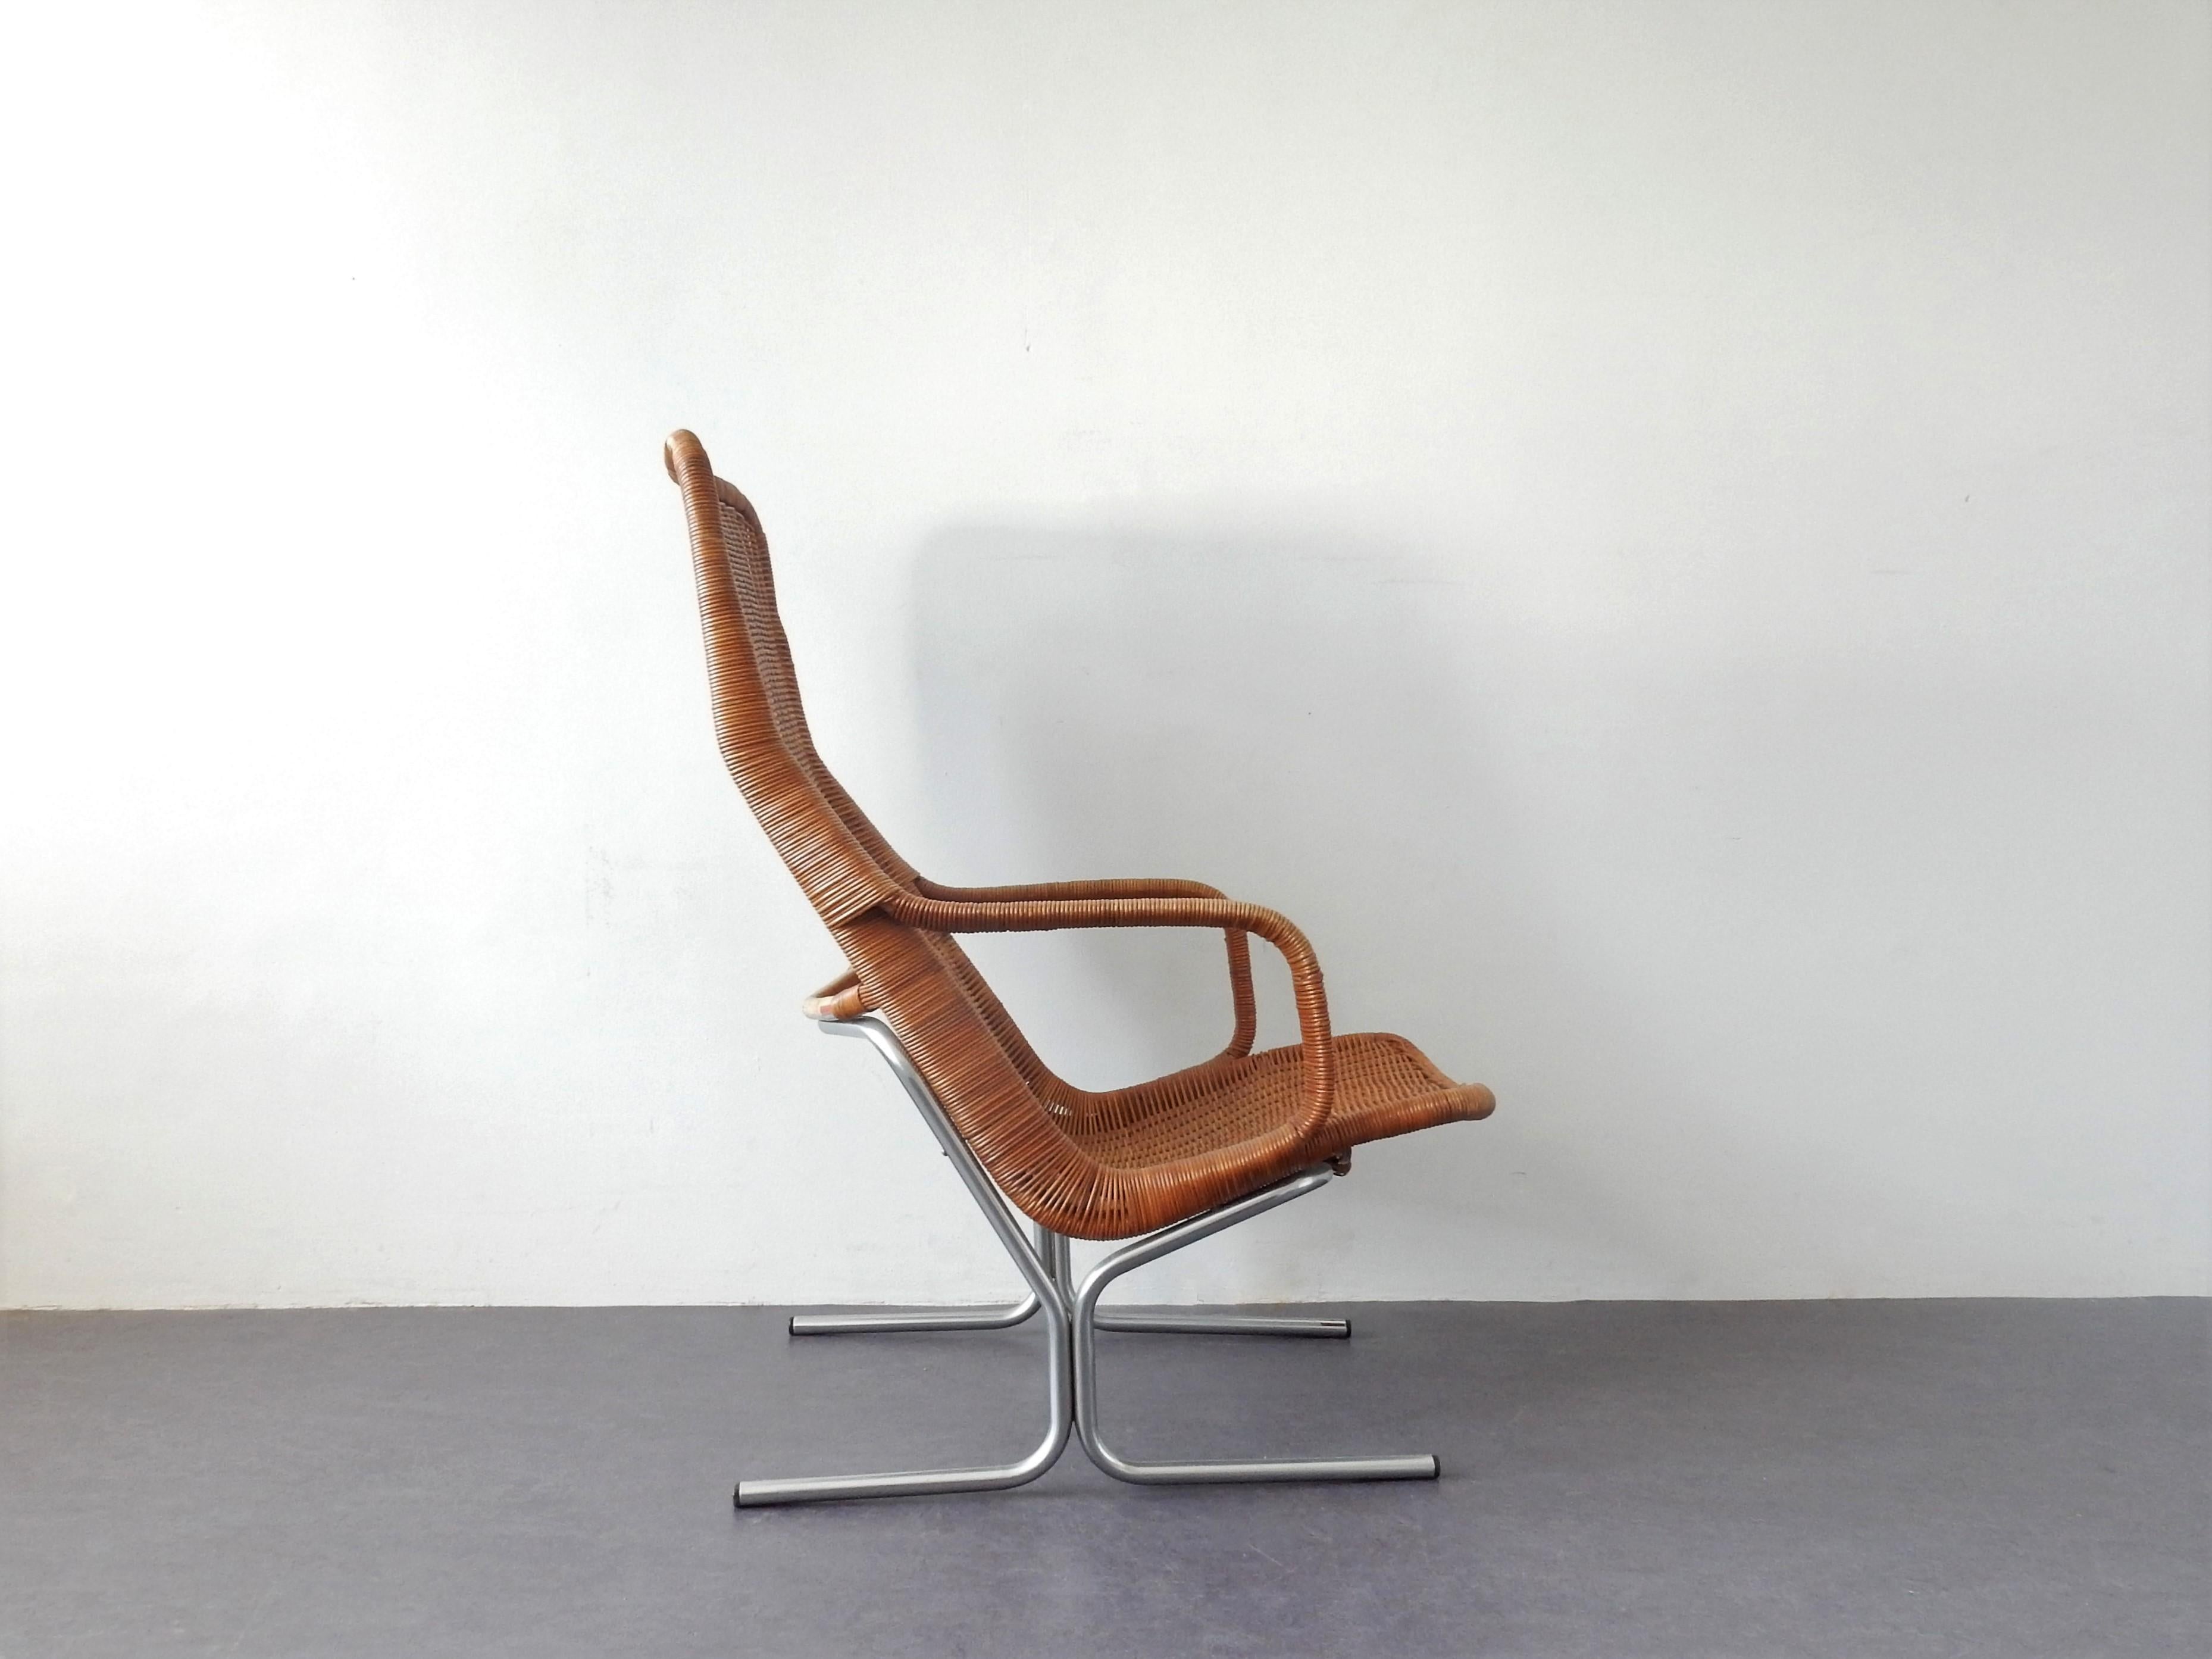 This lounge chair, model 514C, was designed by Dirk van Sliedregt for Gebr. Jonkers (Jonkers brothers) Noordwolde in 1961. The Jonkers brothers were famous for their rattan chairs and furniture. This chair has a webbed cane (high back) seat and